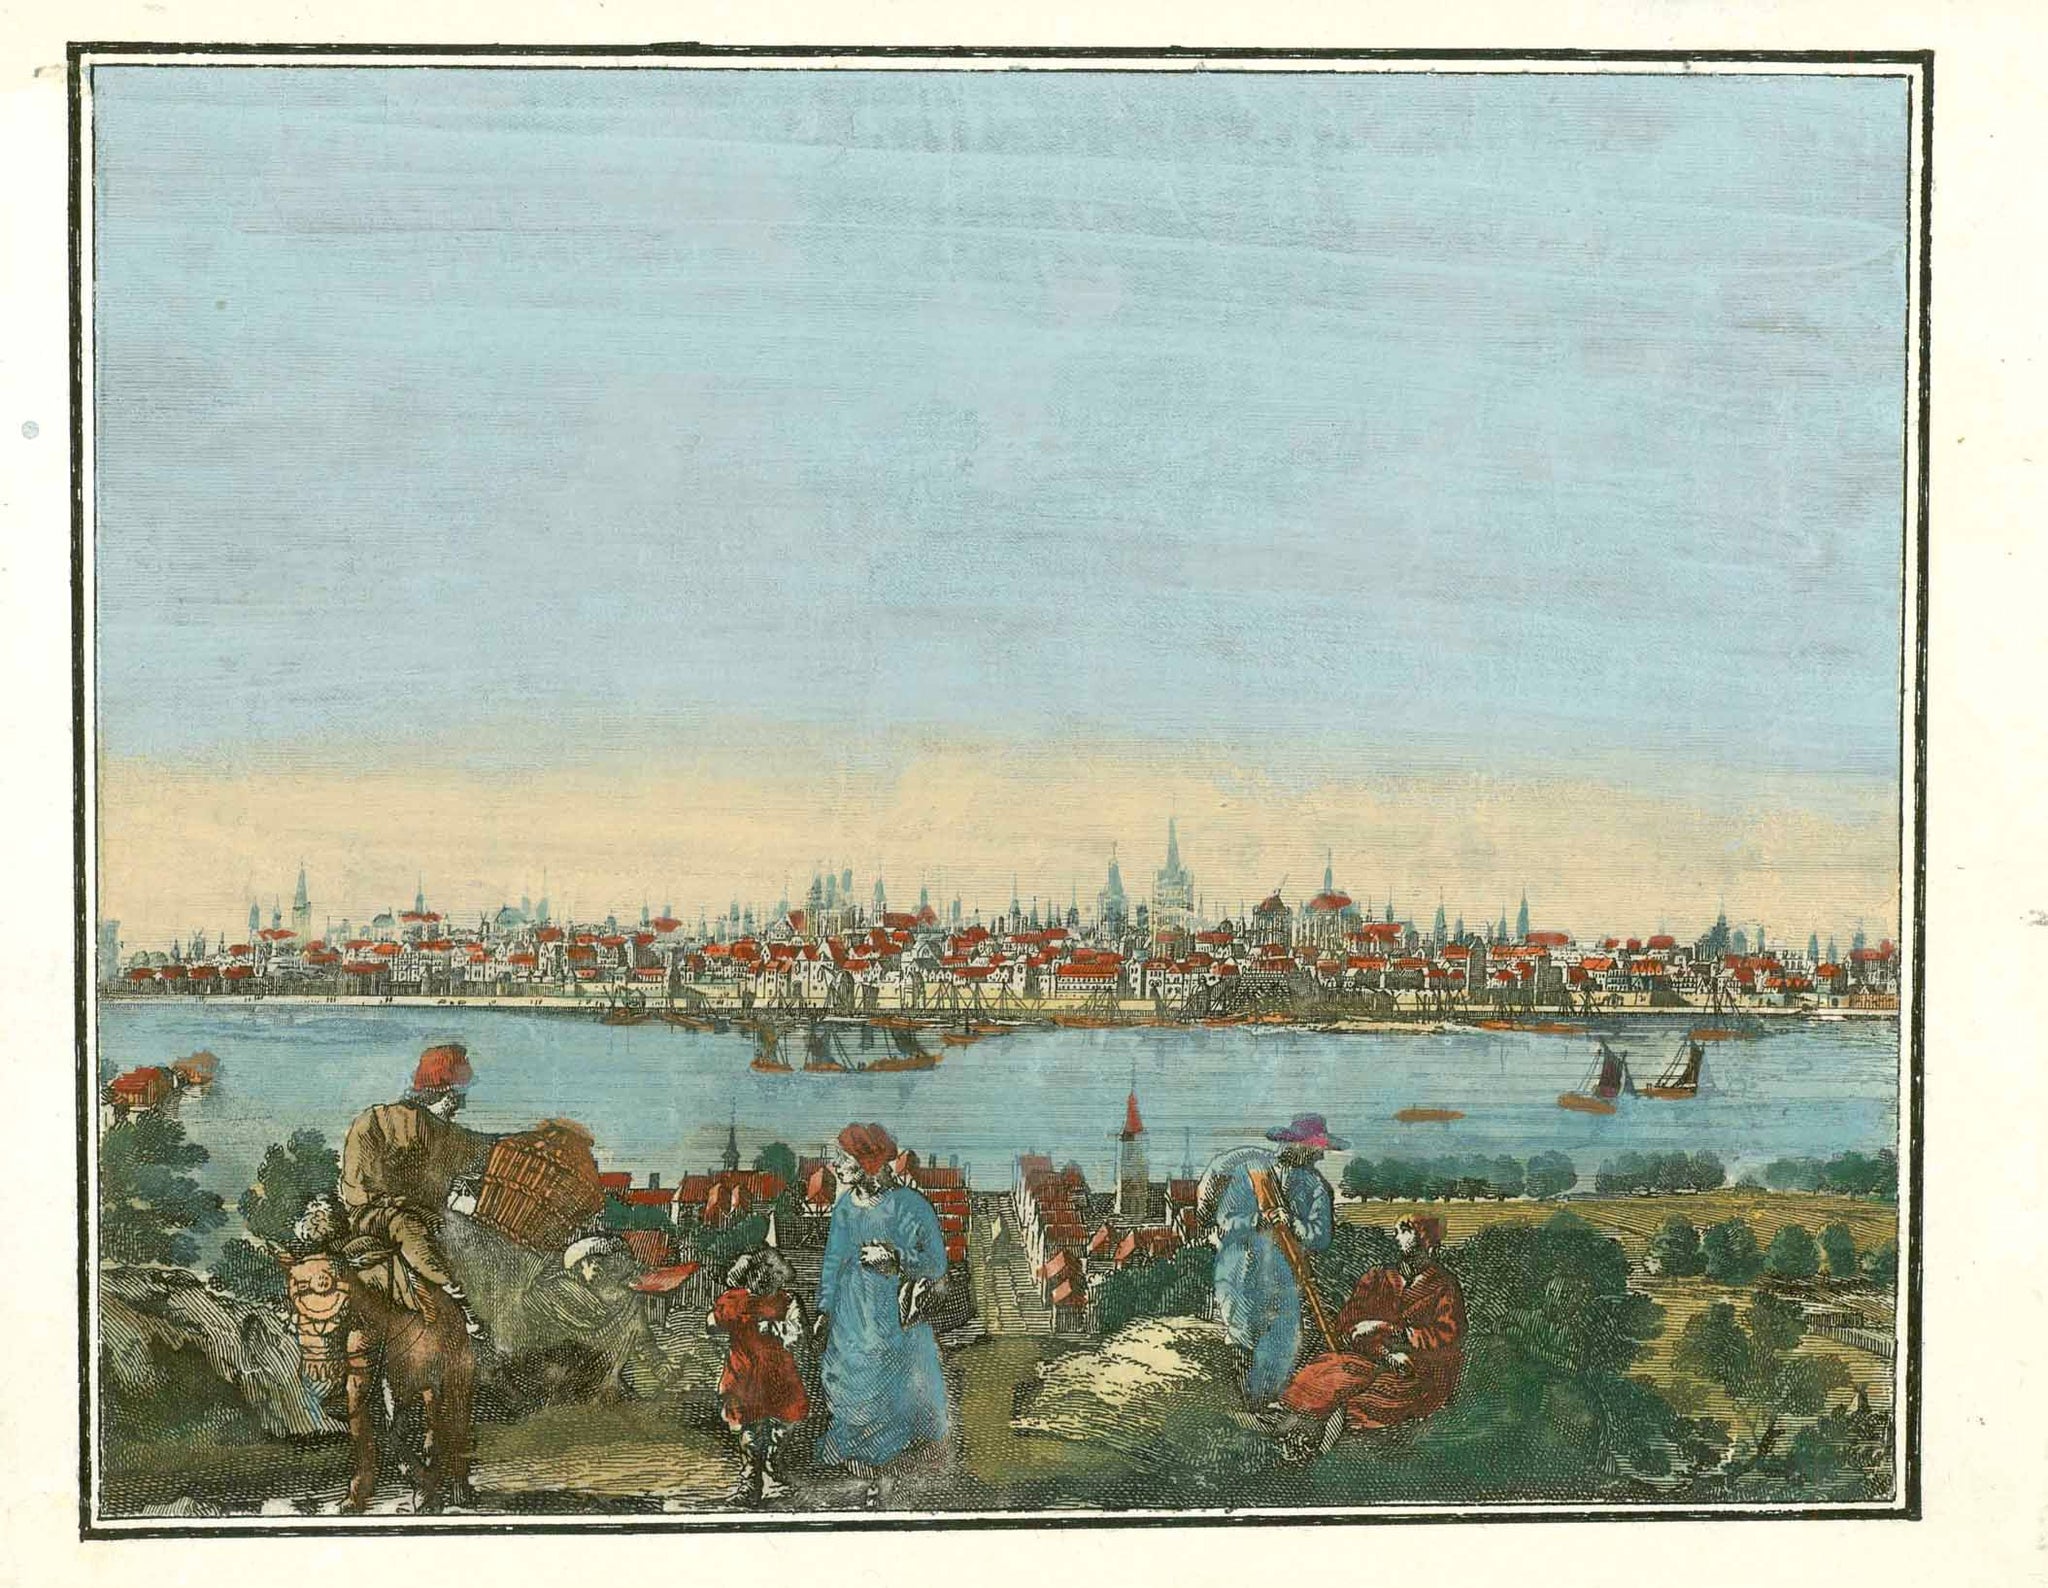 Original antique print   Ohne Titel. Cologne (Koeln) Panorama view of the famous city on the Rhine from Deutz across the river.  Hand-colored copper engraving  Published in "Hecatompolis sive Totius Terrarum Oppida Nobiliora Centrum..." by Peter Schenk (1660-1711) in Amsterdam, 1702  A RARE print!